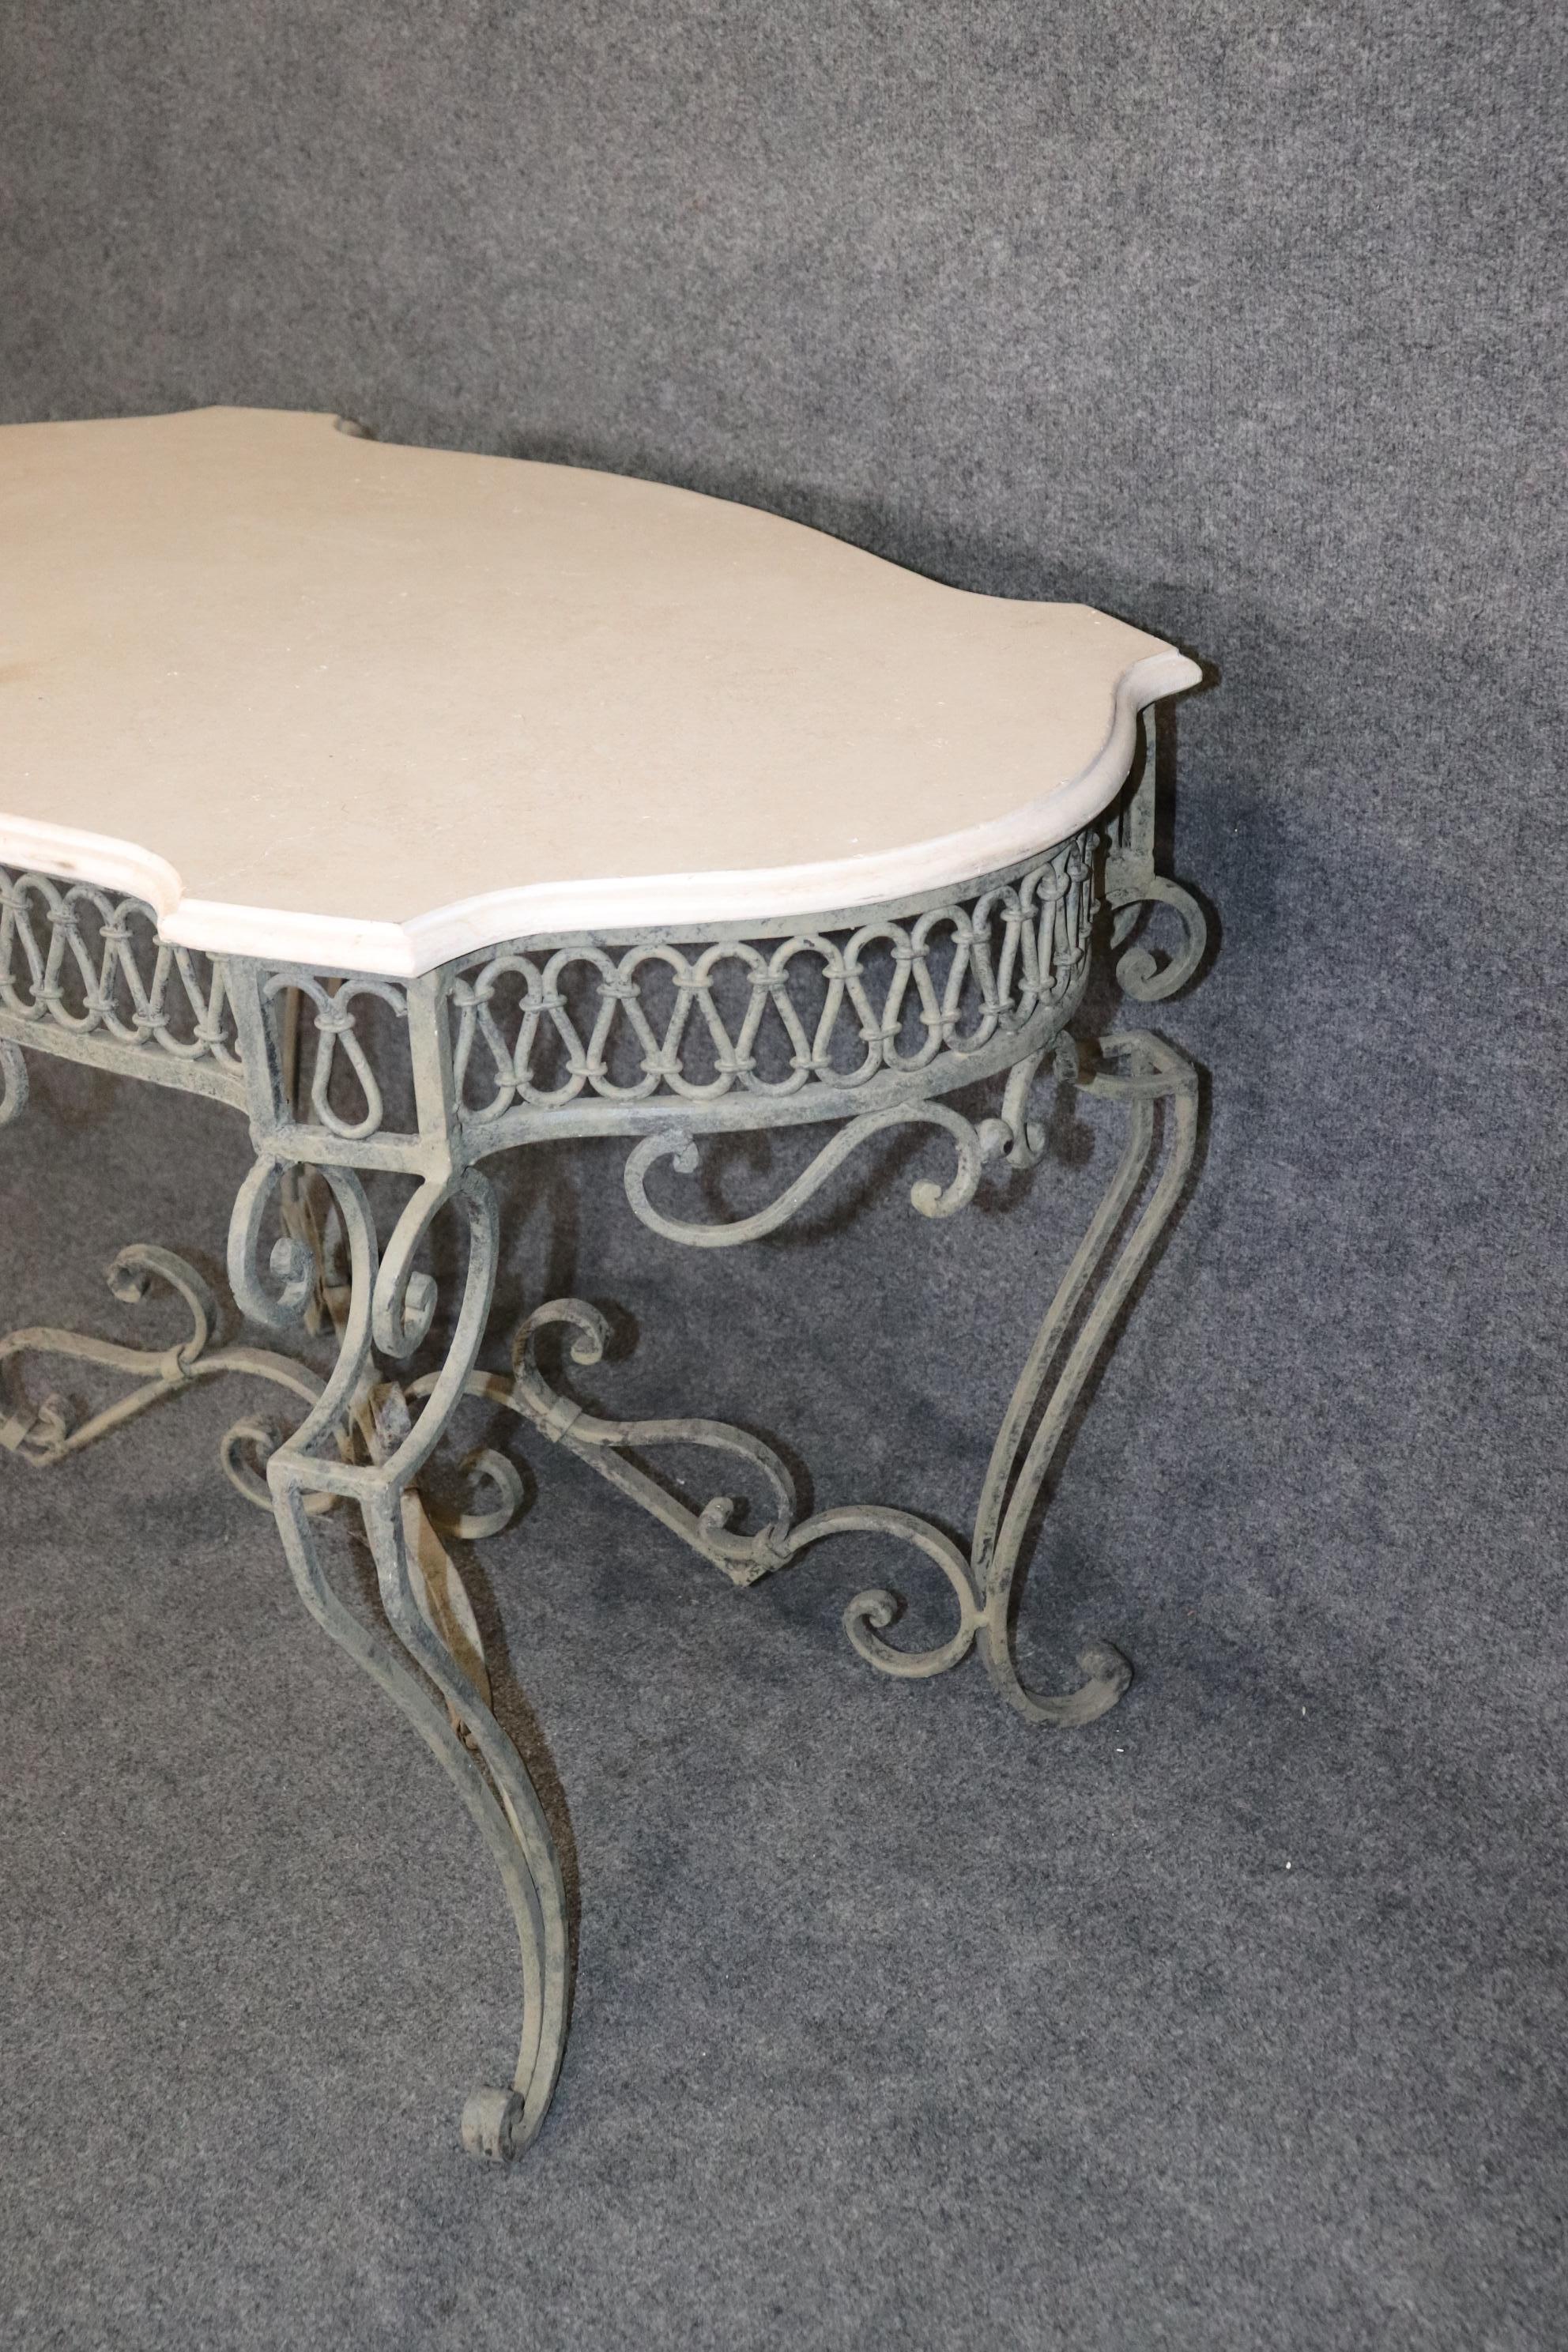 Dimensions- H: 31in W: 47 1/2in D: 27 3/4in 

This Vintage Wrought Iron Regency Style Travertine Top Center Table is truly incredible and is made of the highest quality! If you look at the photos provided, you can see the distressed wrought iron